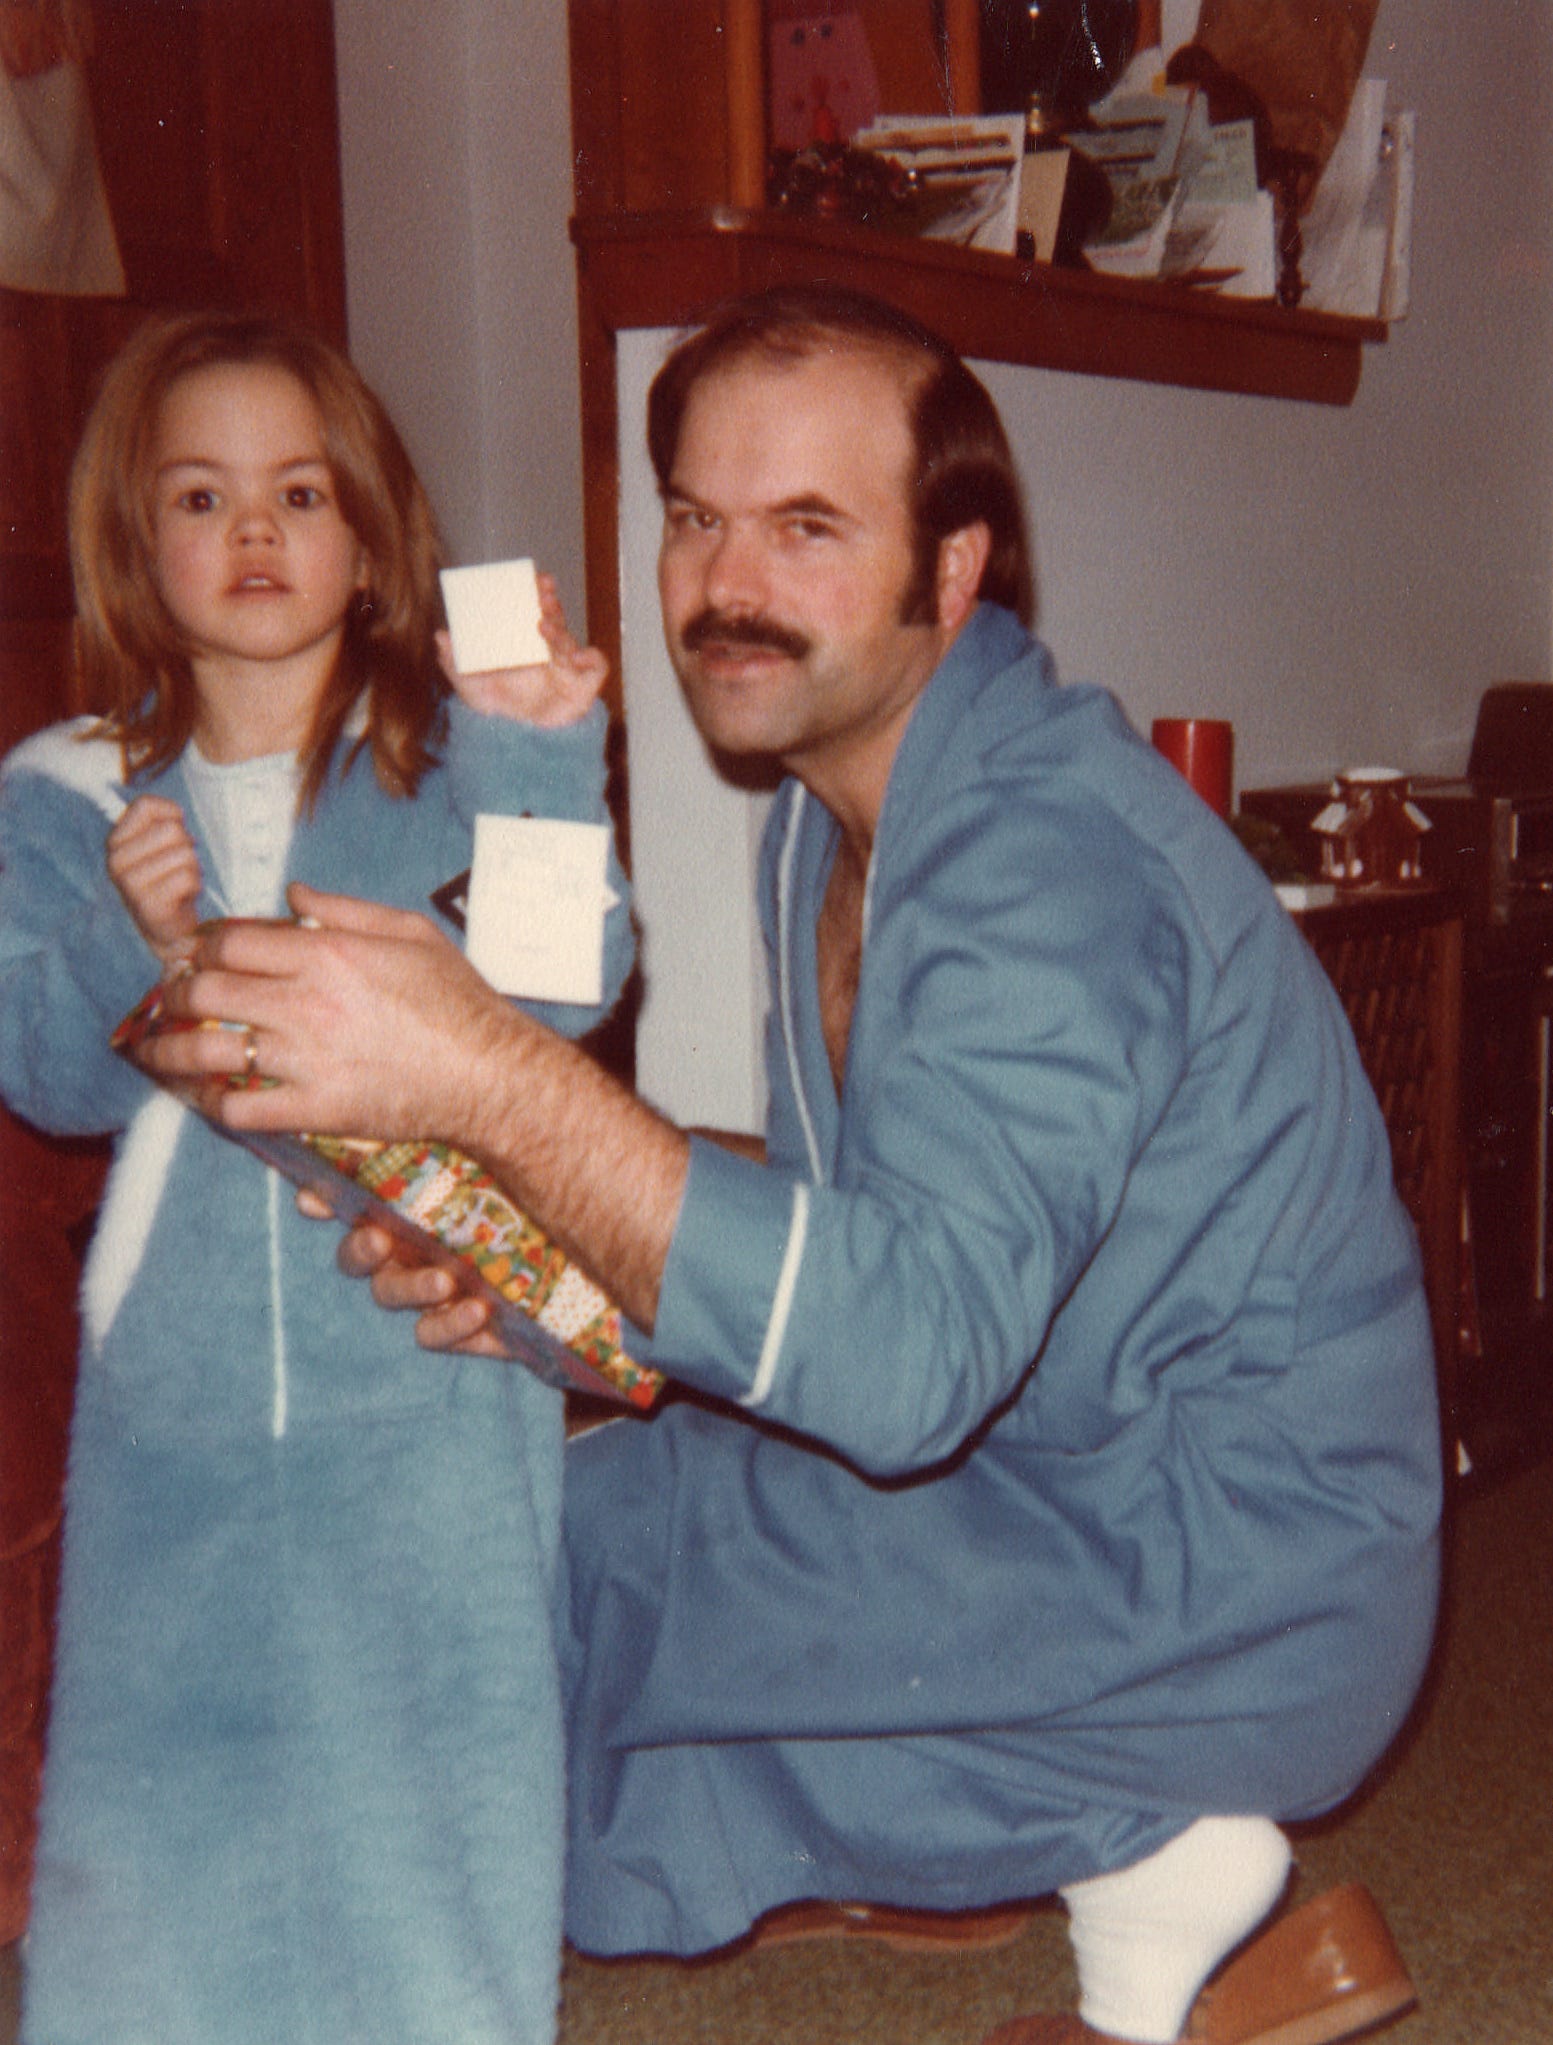 Christmas Day 1981. Kerri Rawson with her father Dennis Rader, better known to the world as serial killer BTK.